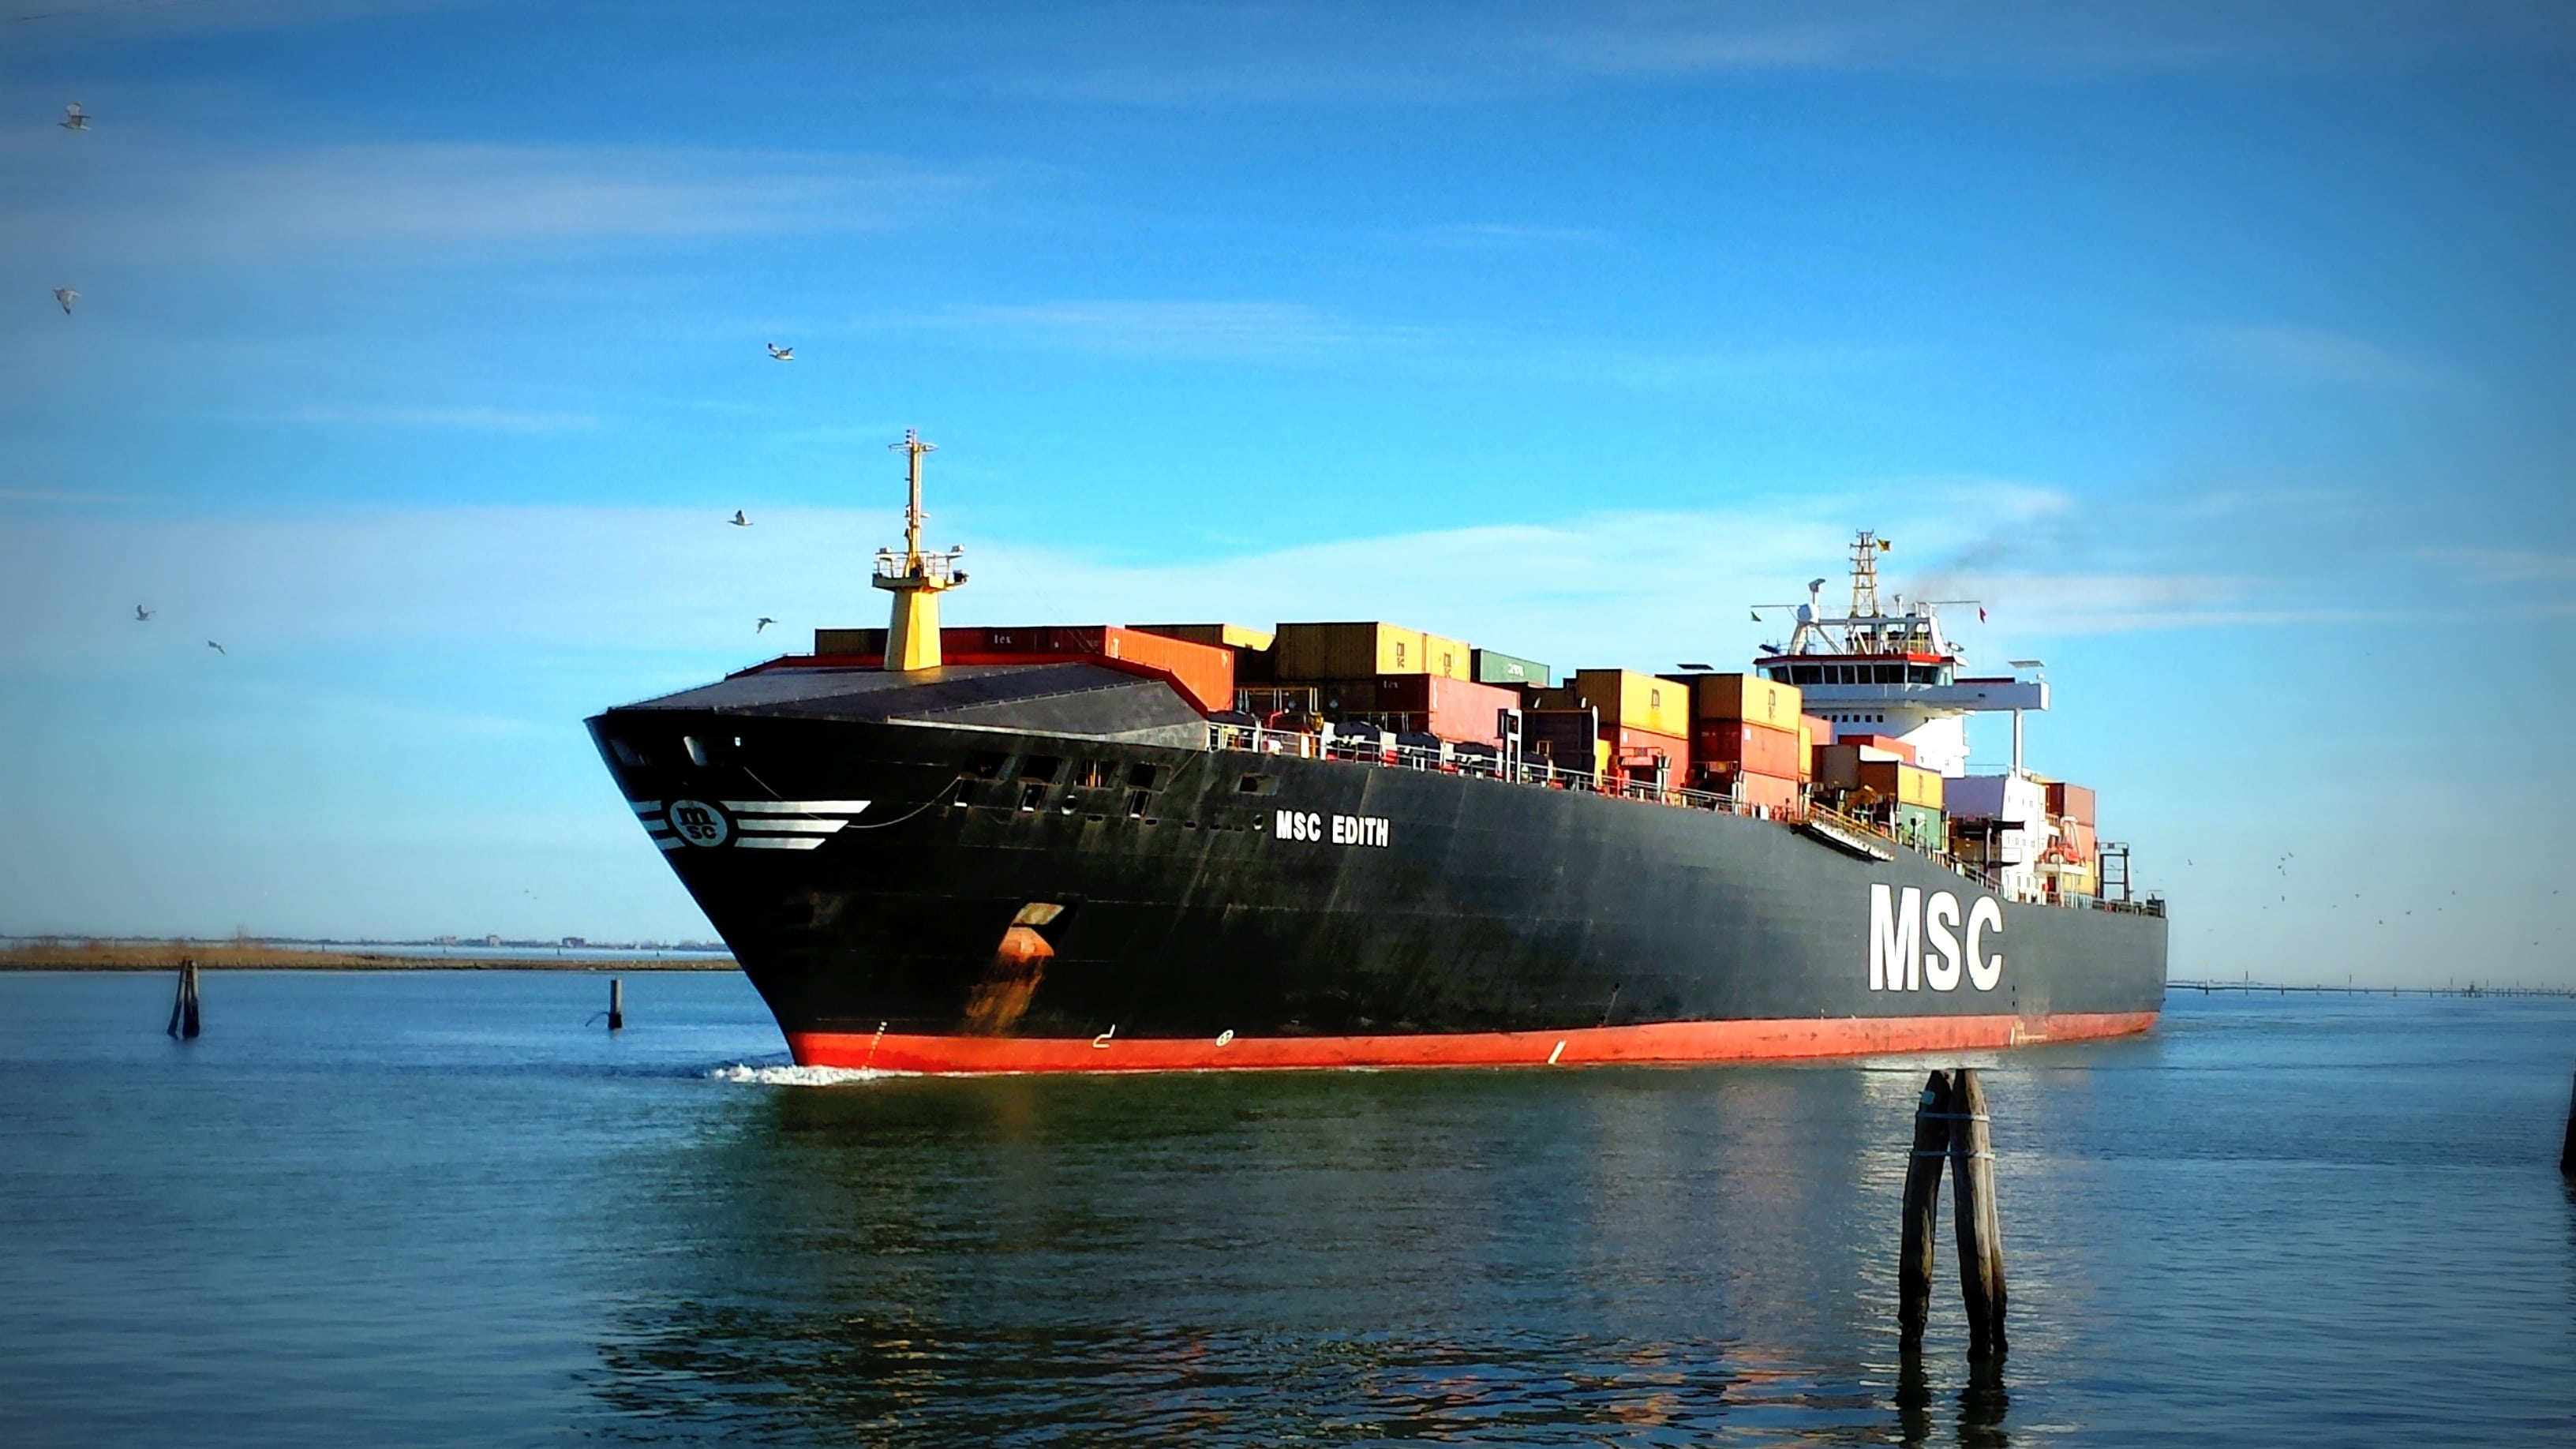 black MSC shipping boat in body of water, merchant, port, freighter